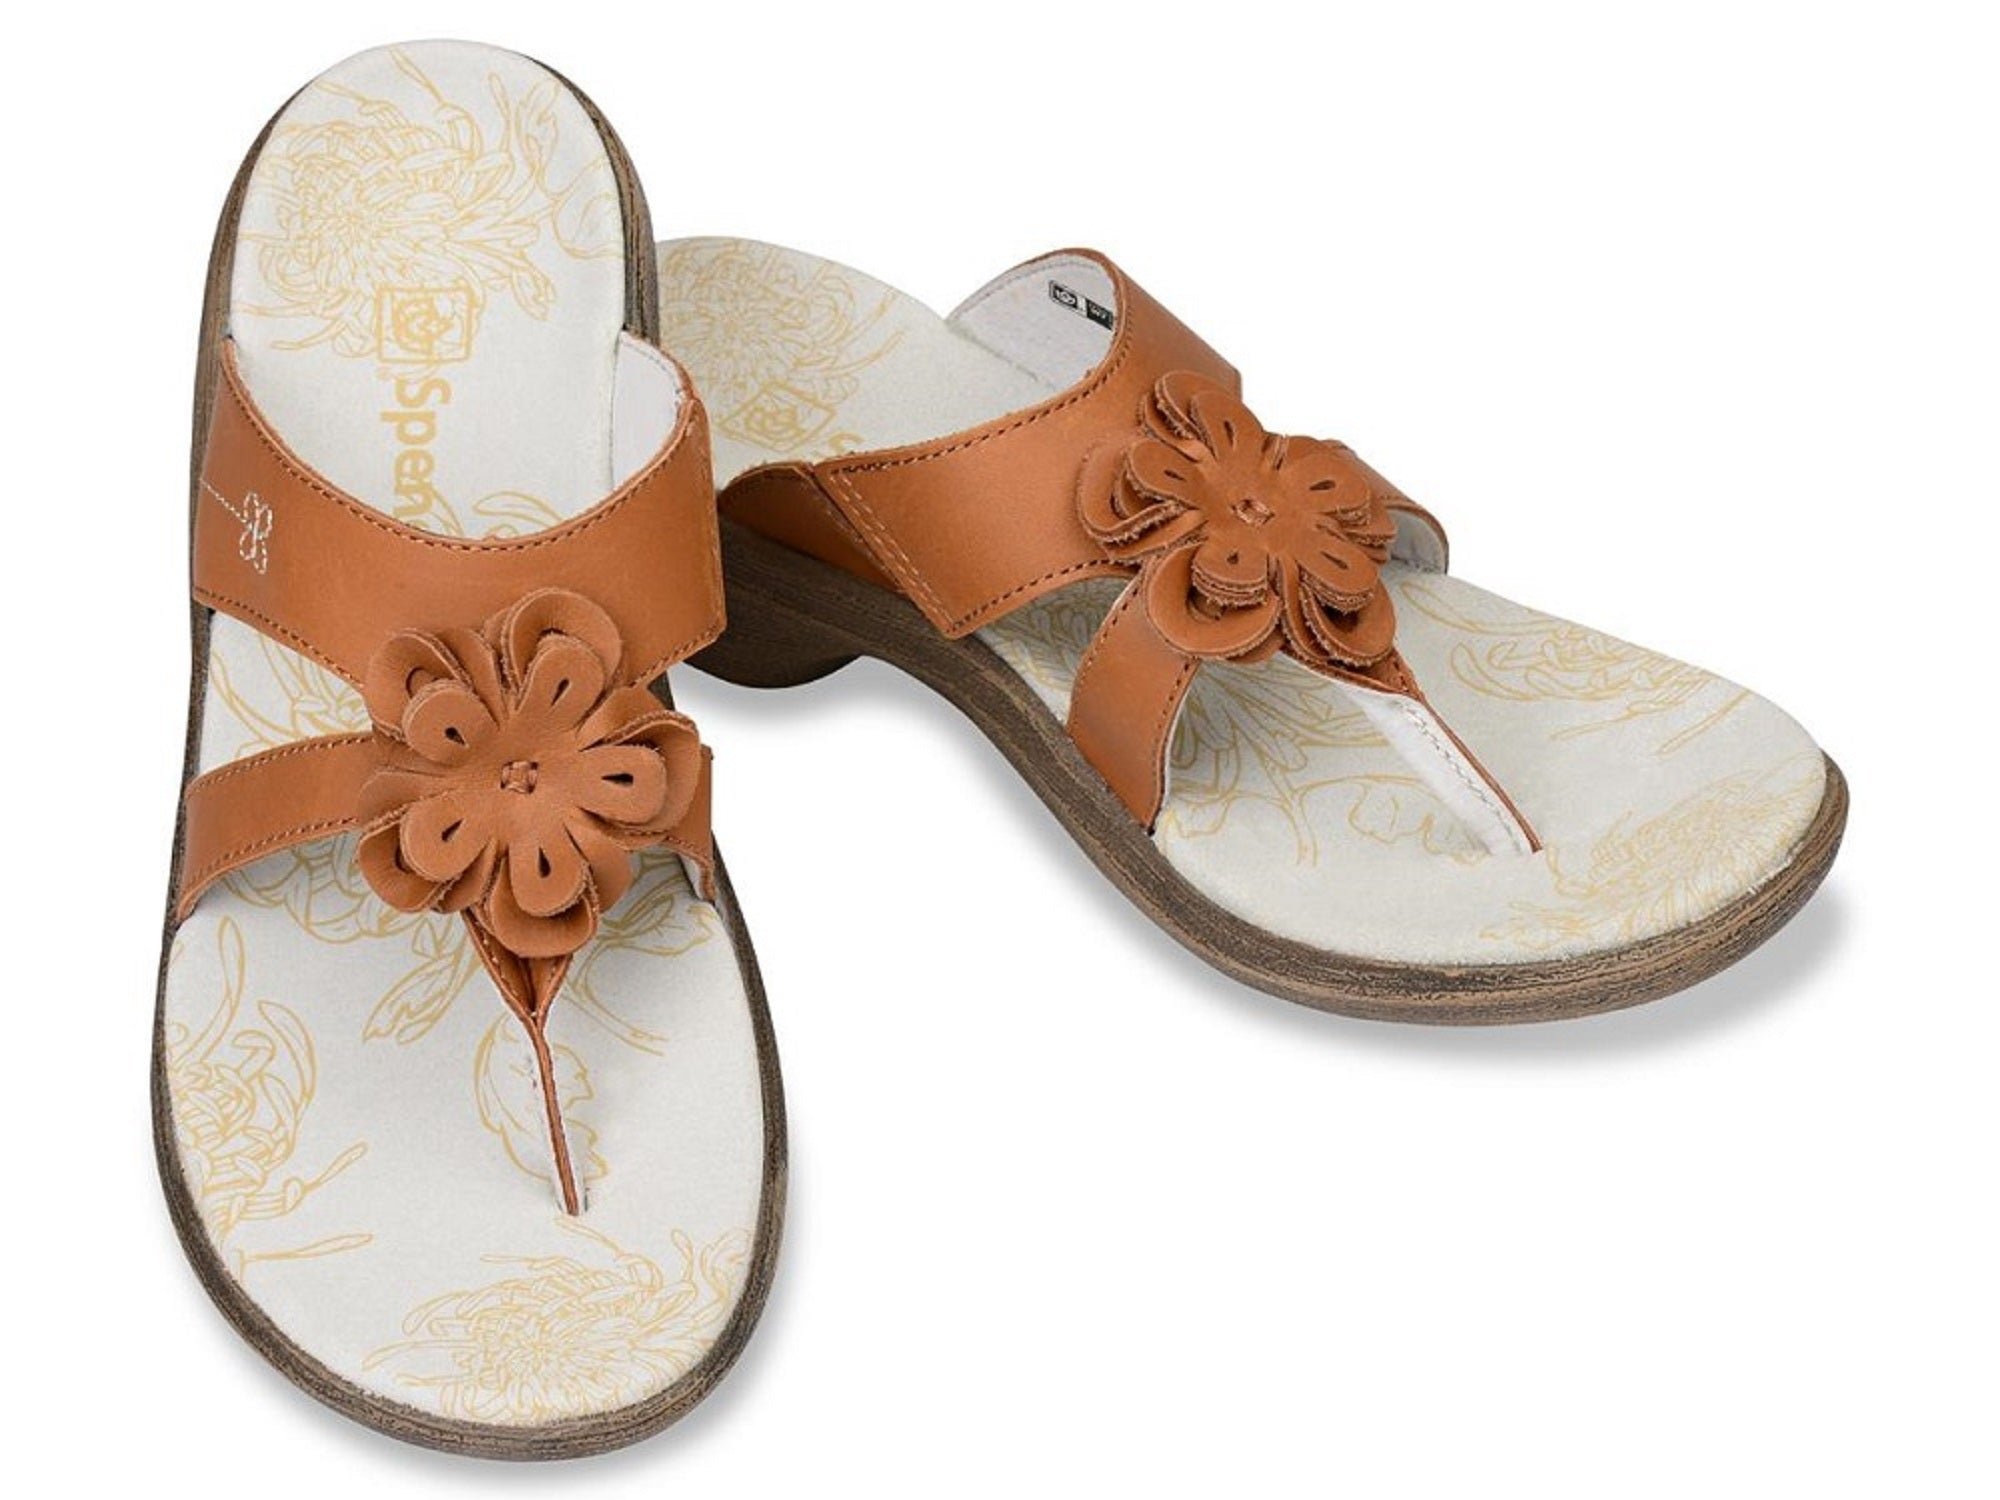 Spenco Rose - Supportive Casual Sandals - Tan Women's - Size 6